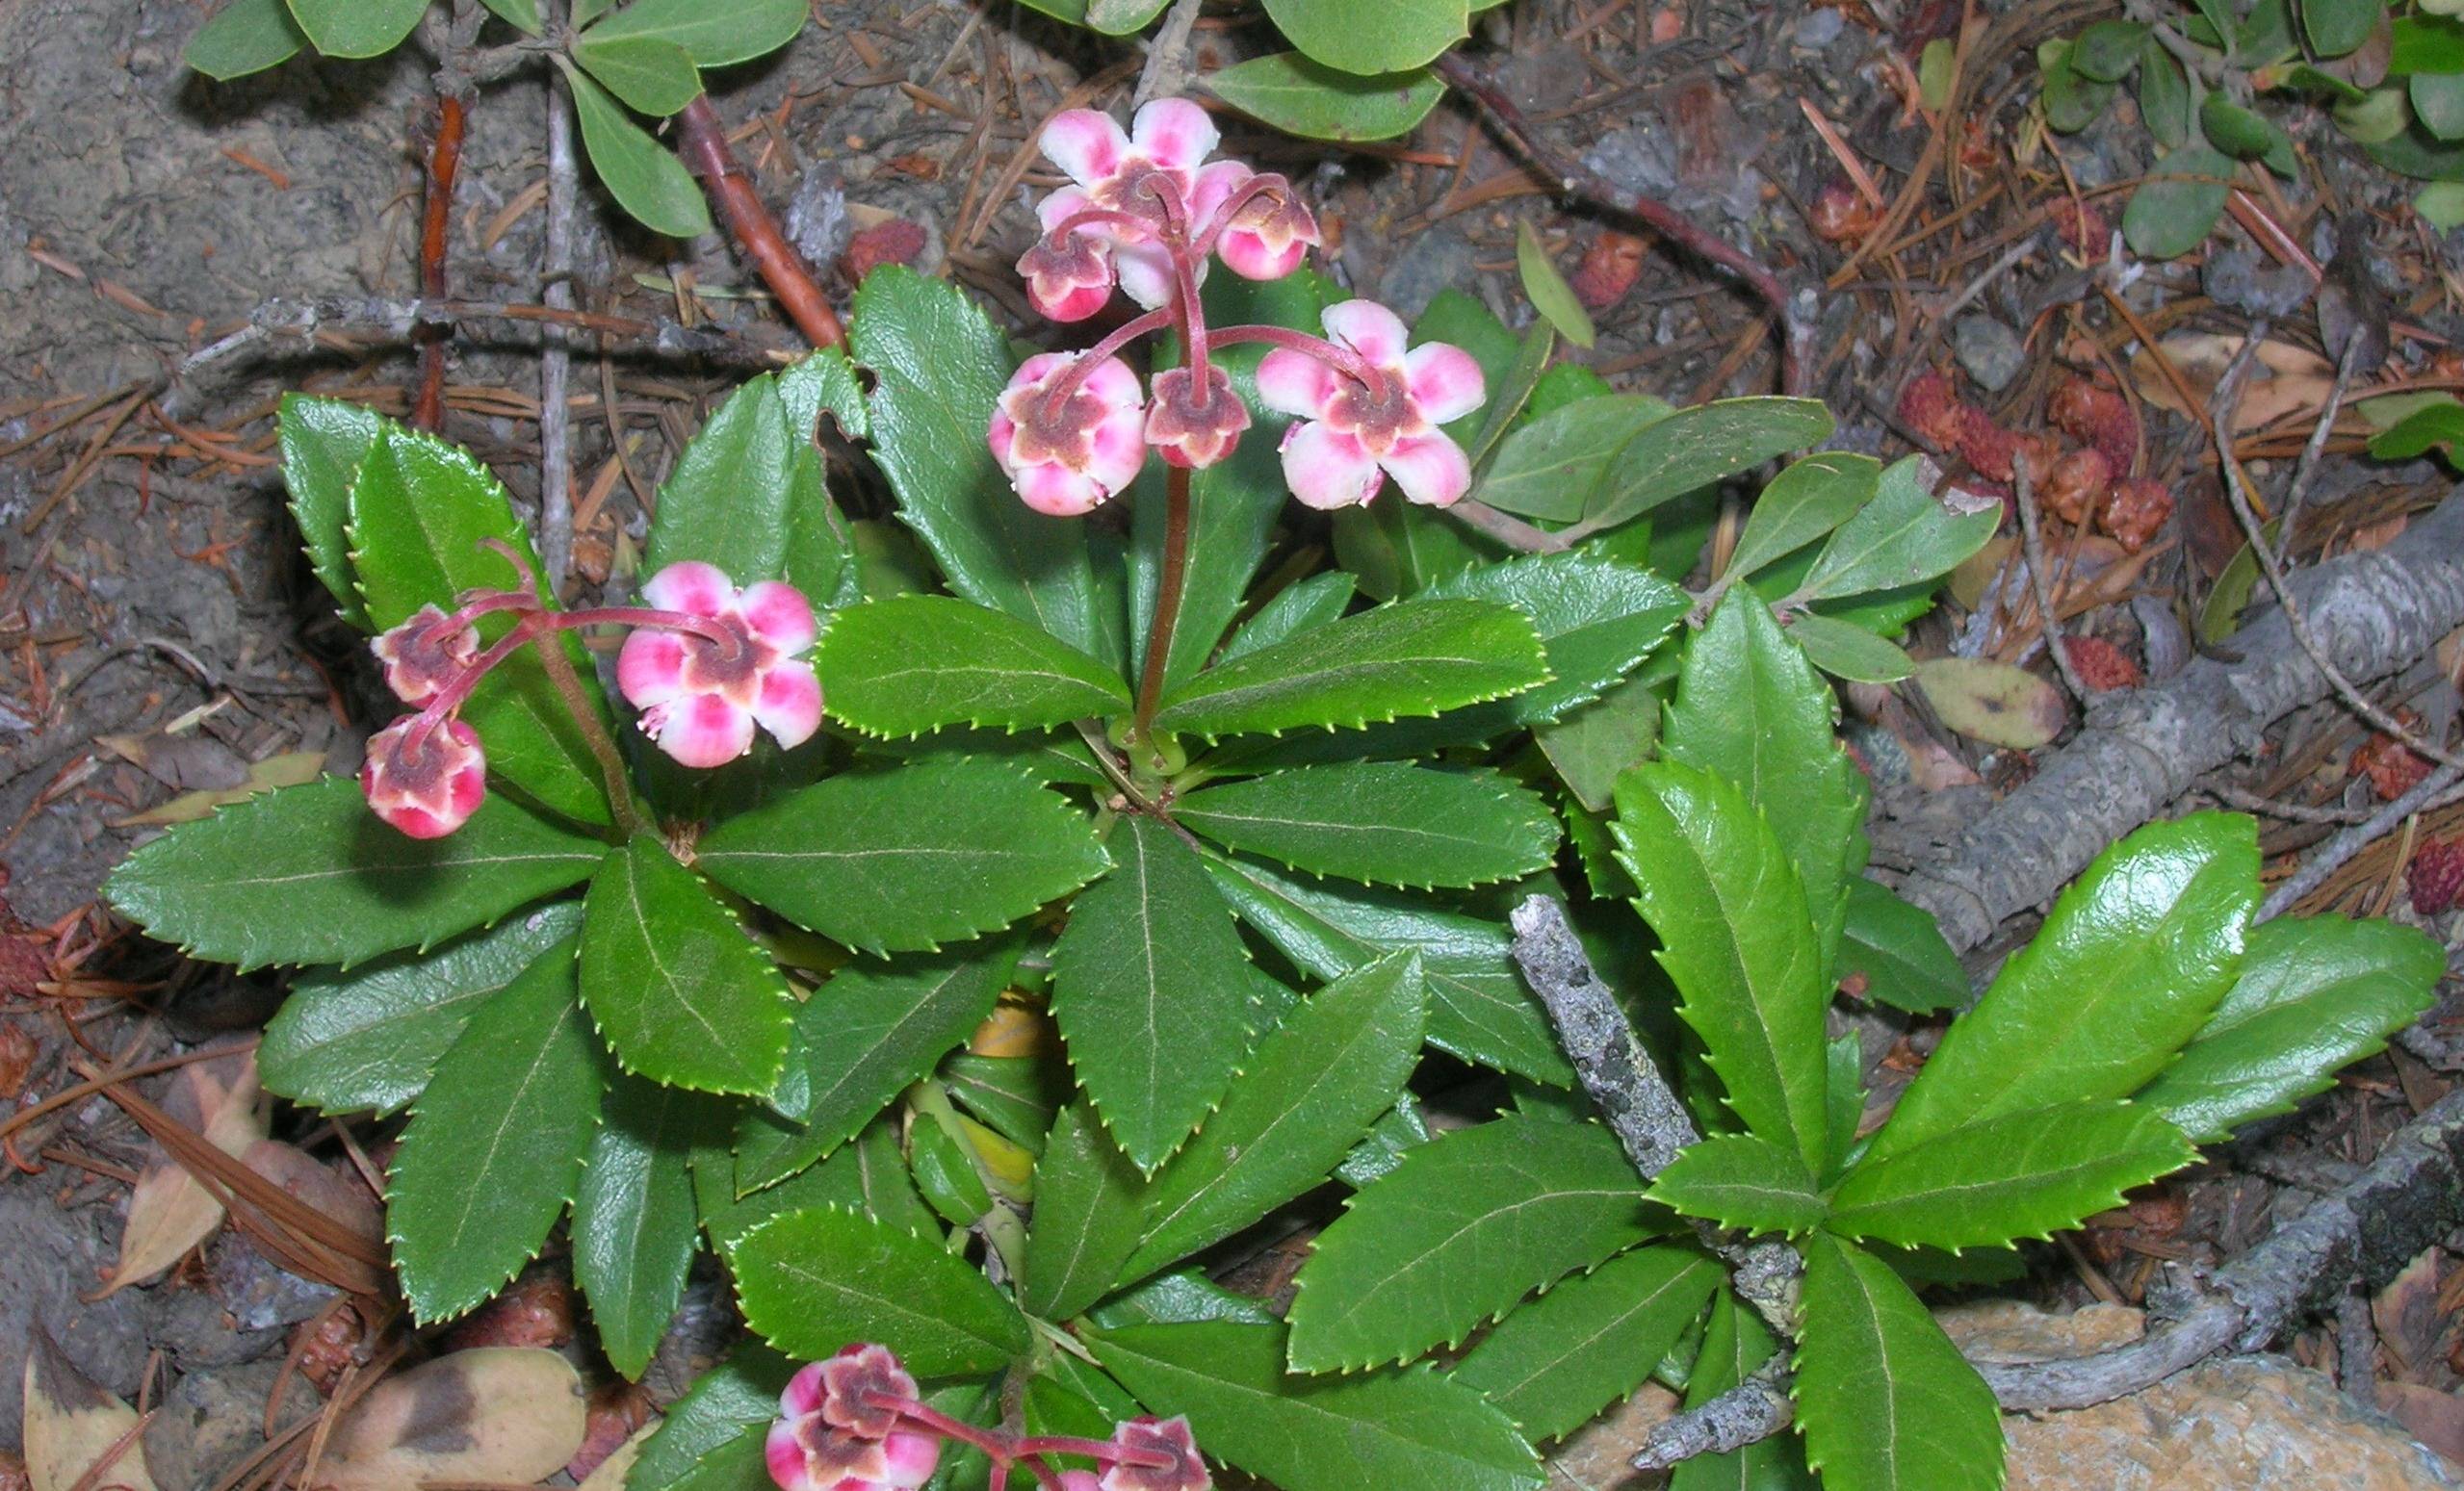 pink-white flowers with brown sepals, green leaves and burgundy stems